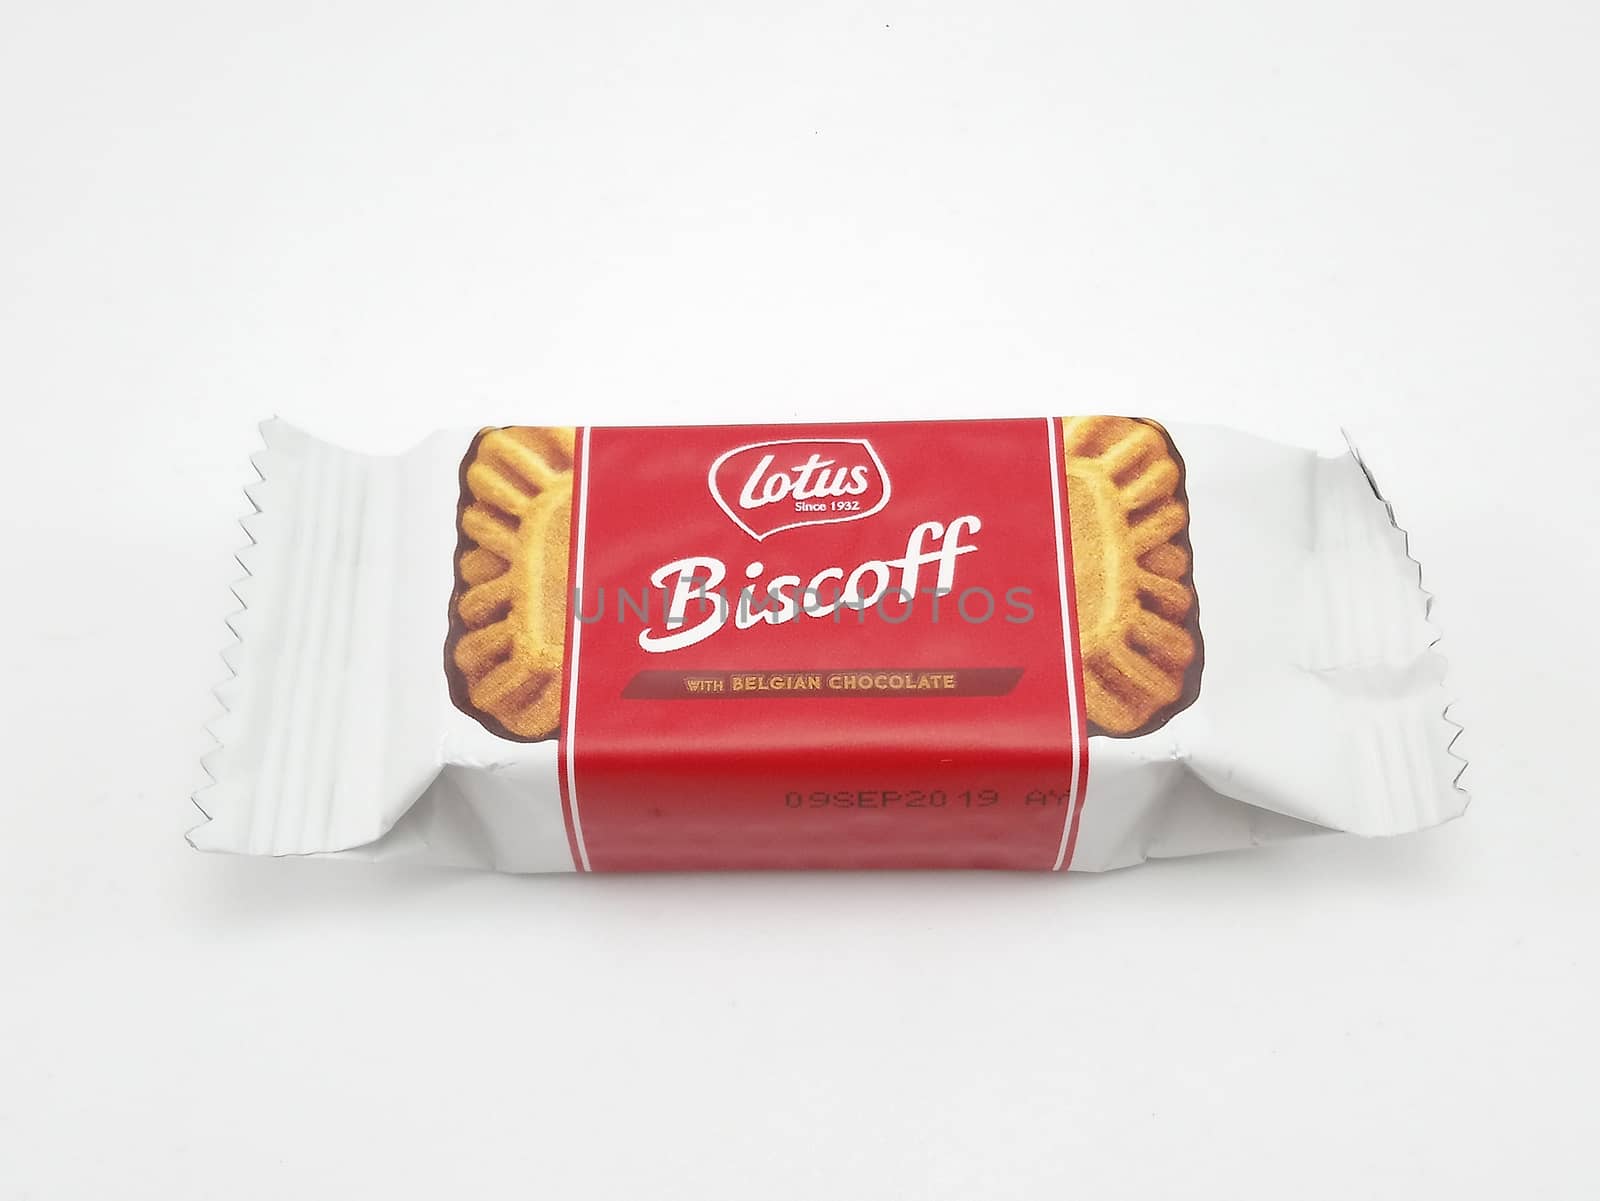 Lotus biscoff with Belgian chocolate in Manila, Philippines by imwaltersy